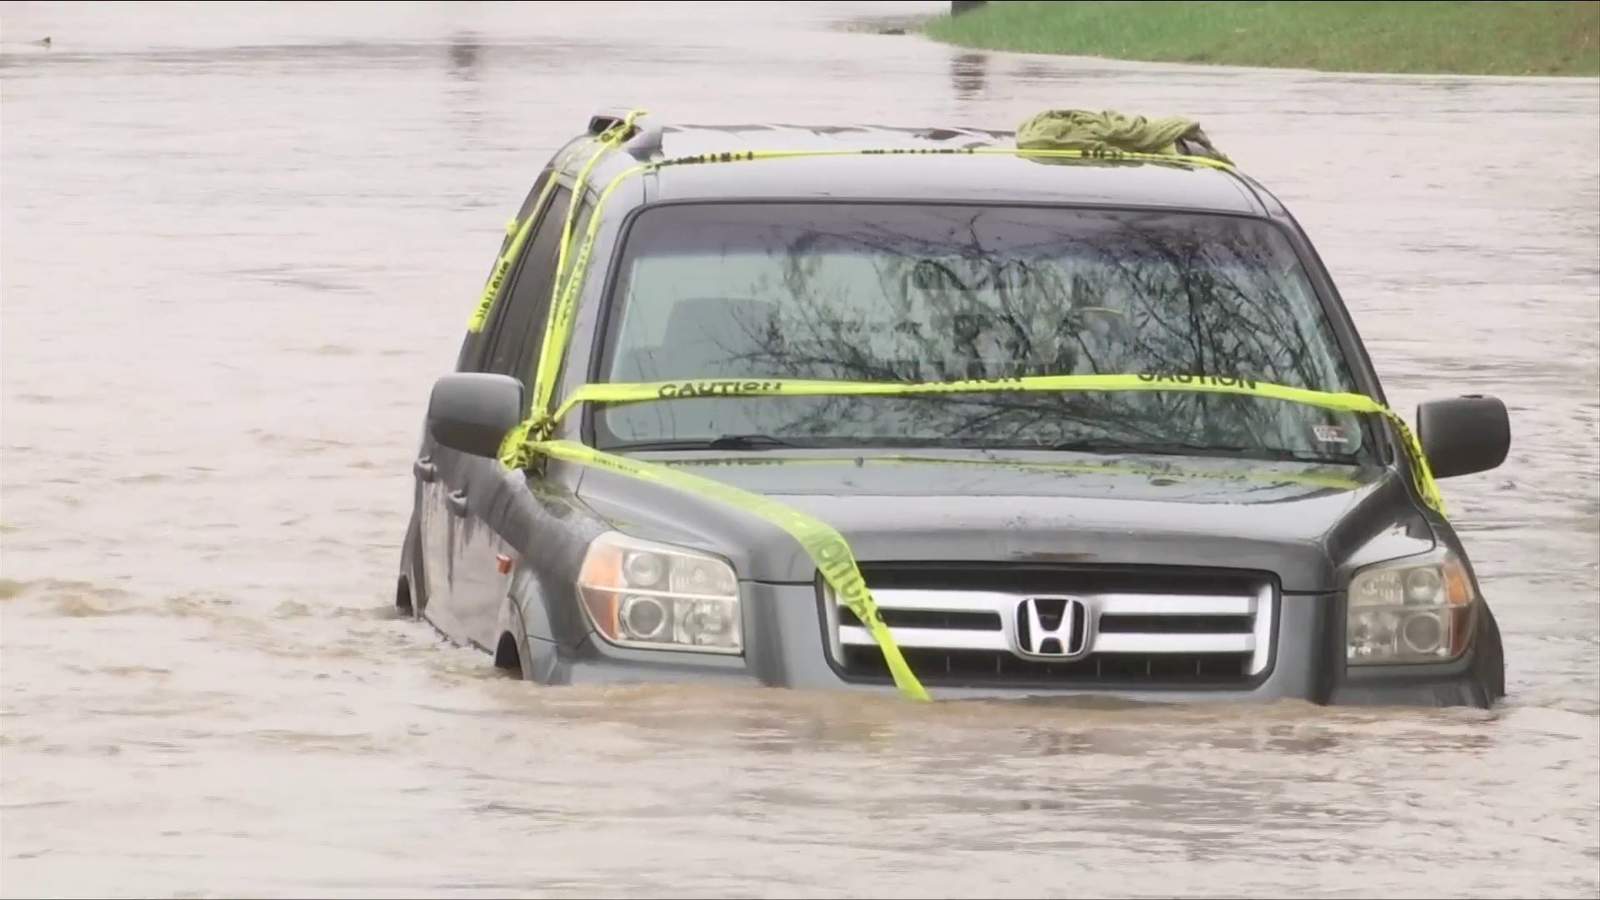 Driver rescued from floodwaters in Roanoke as severe, widespread flooding was reported